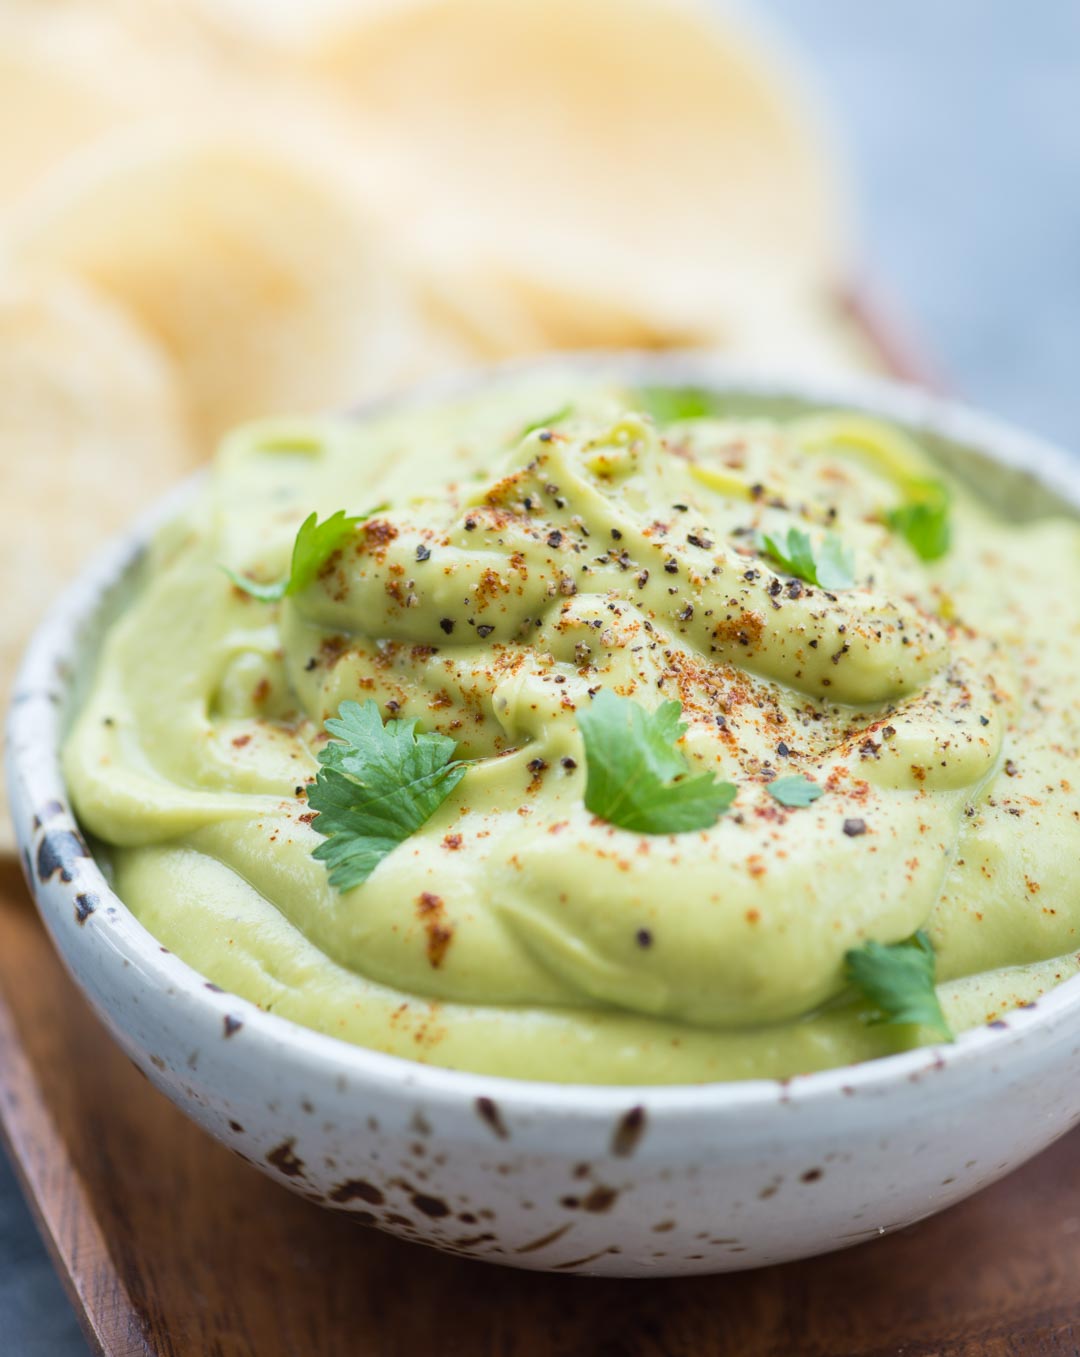 Close up image of creamy and soft avocado dip with cilantro leaves and chilli flakes as garnish on top.